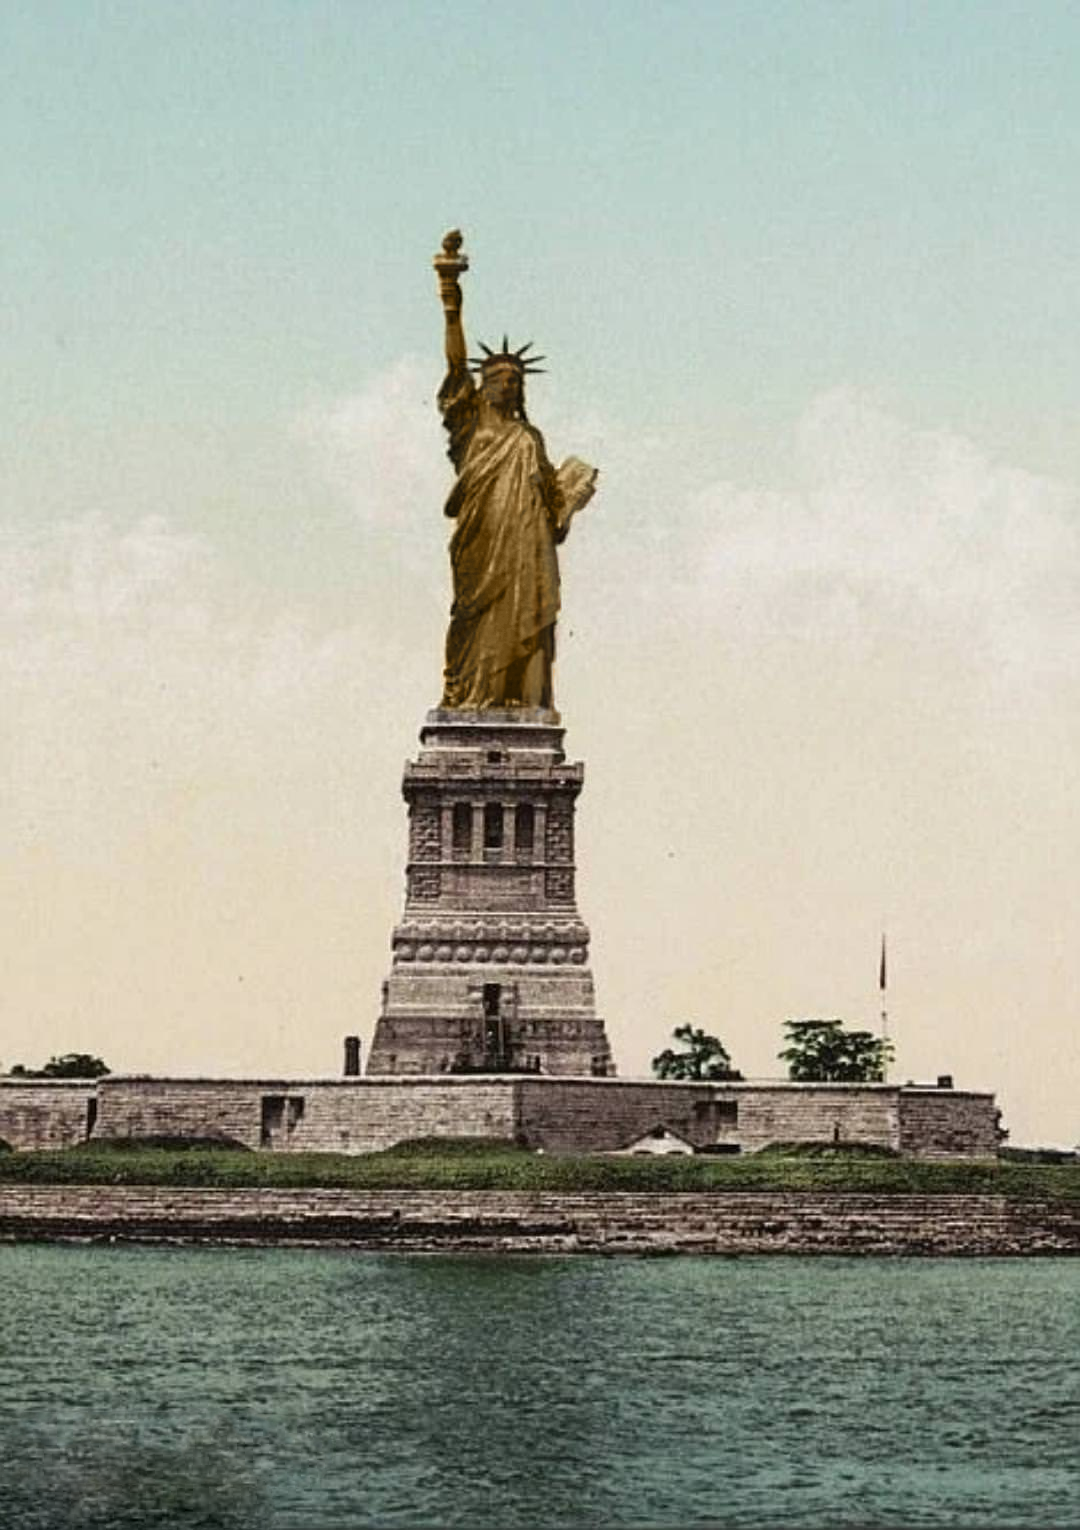 Statue of Liberty before it was ravaged by oxidation